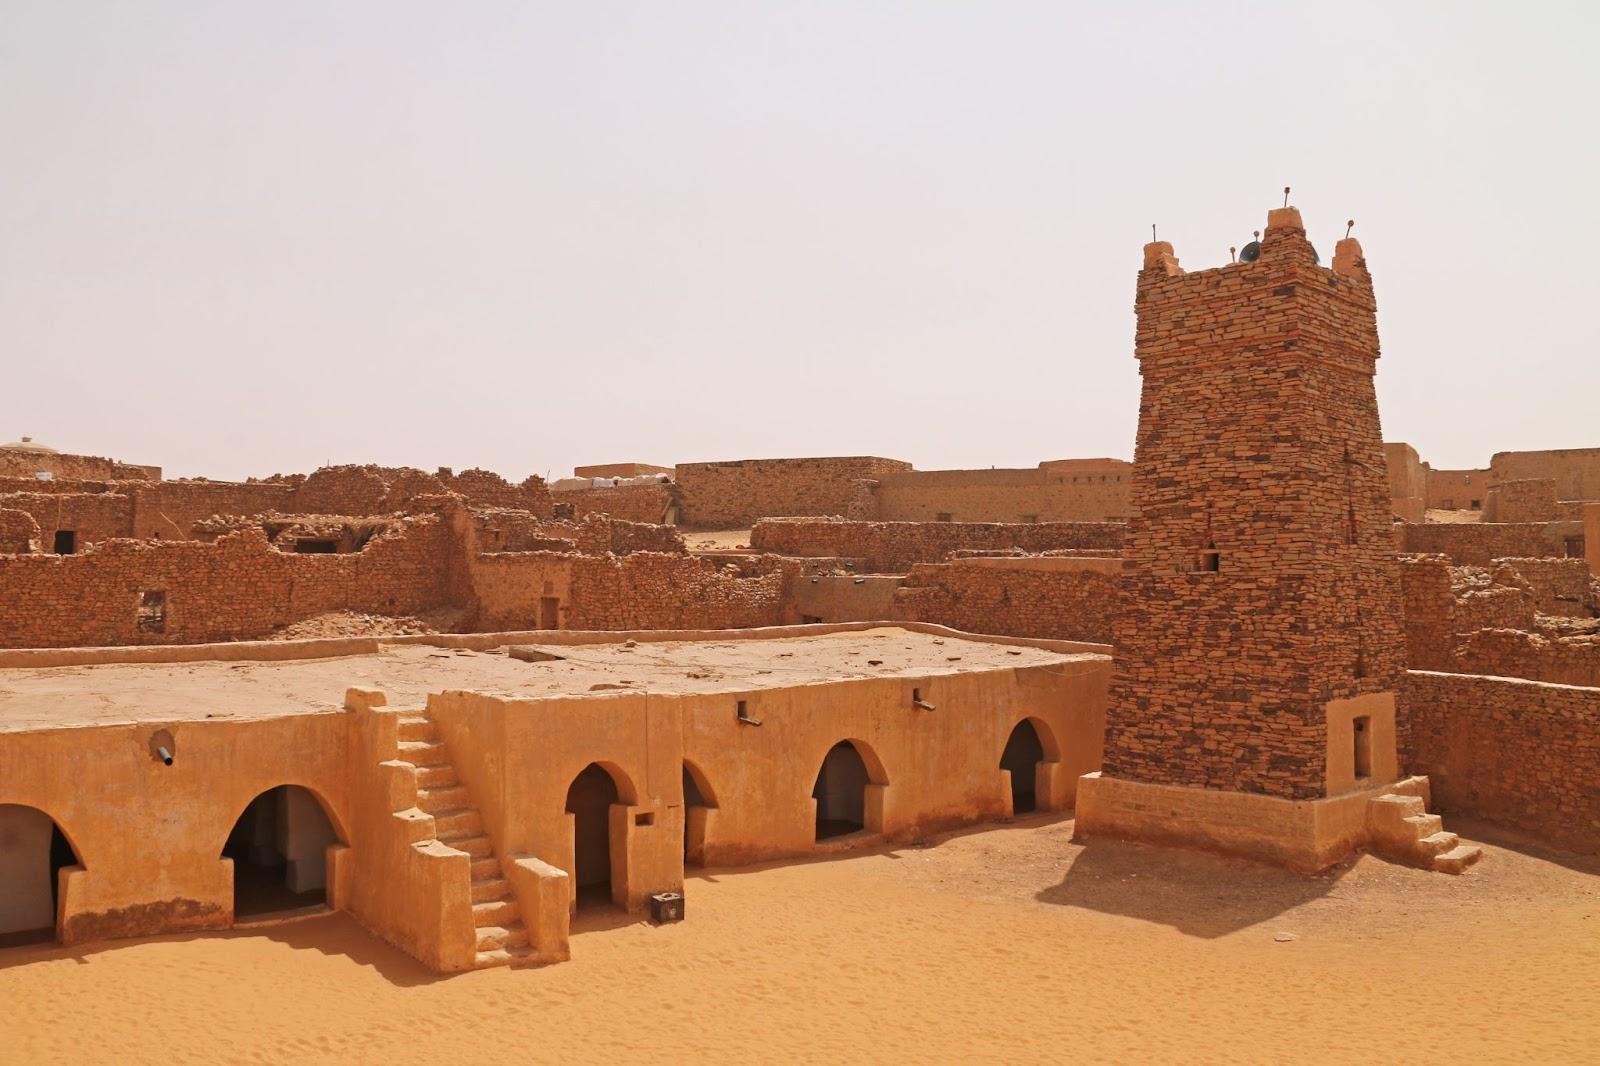 Ancient town of Chinguetti in Mauritania.